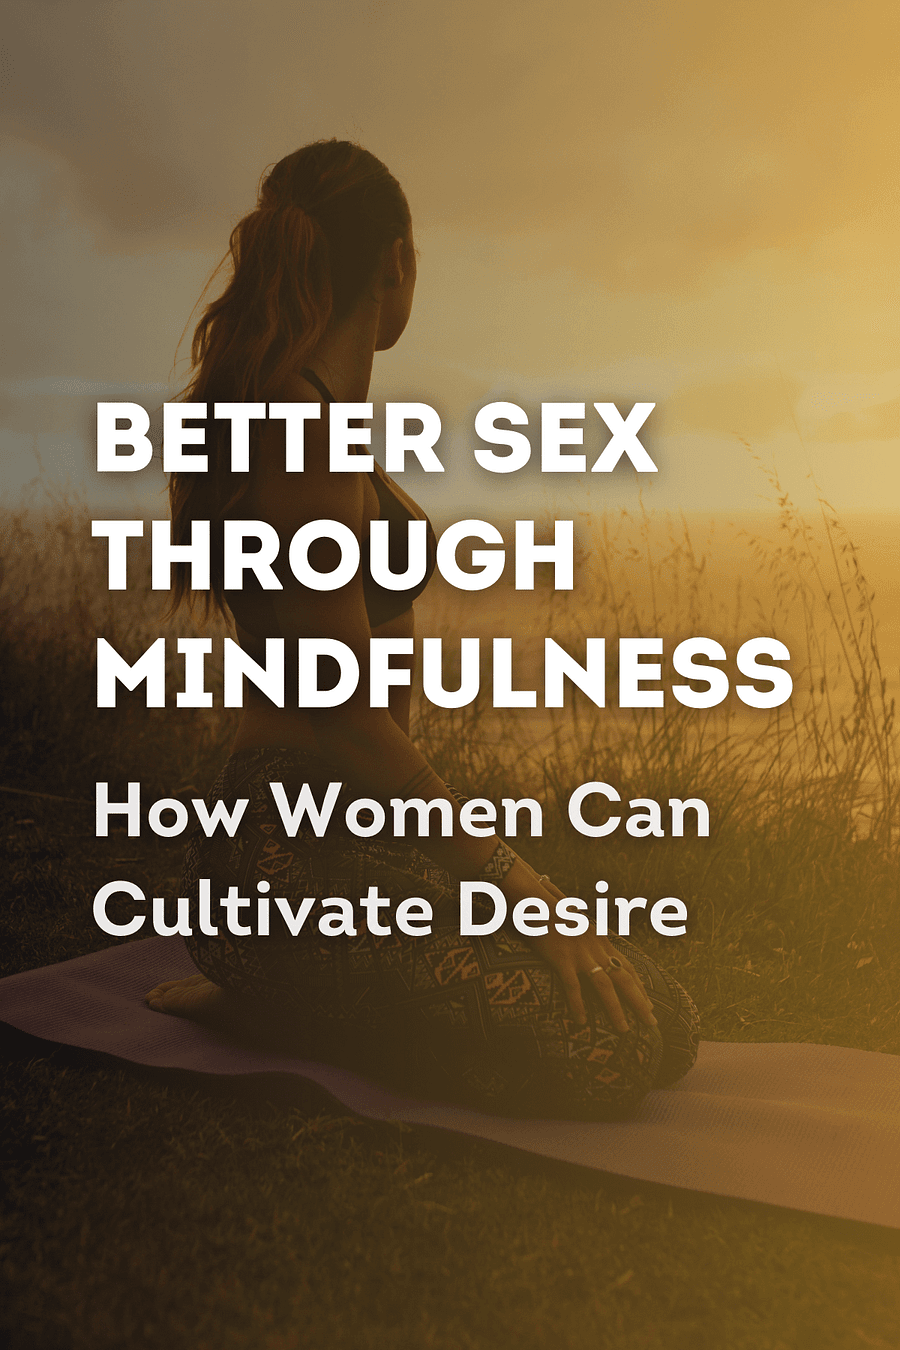 Better Sex Through Mindfulness by Lori A. Brotto - Book Summary